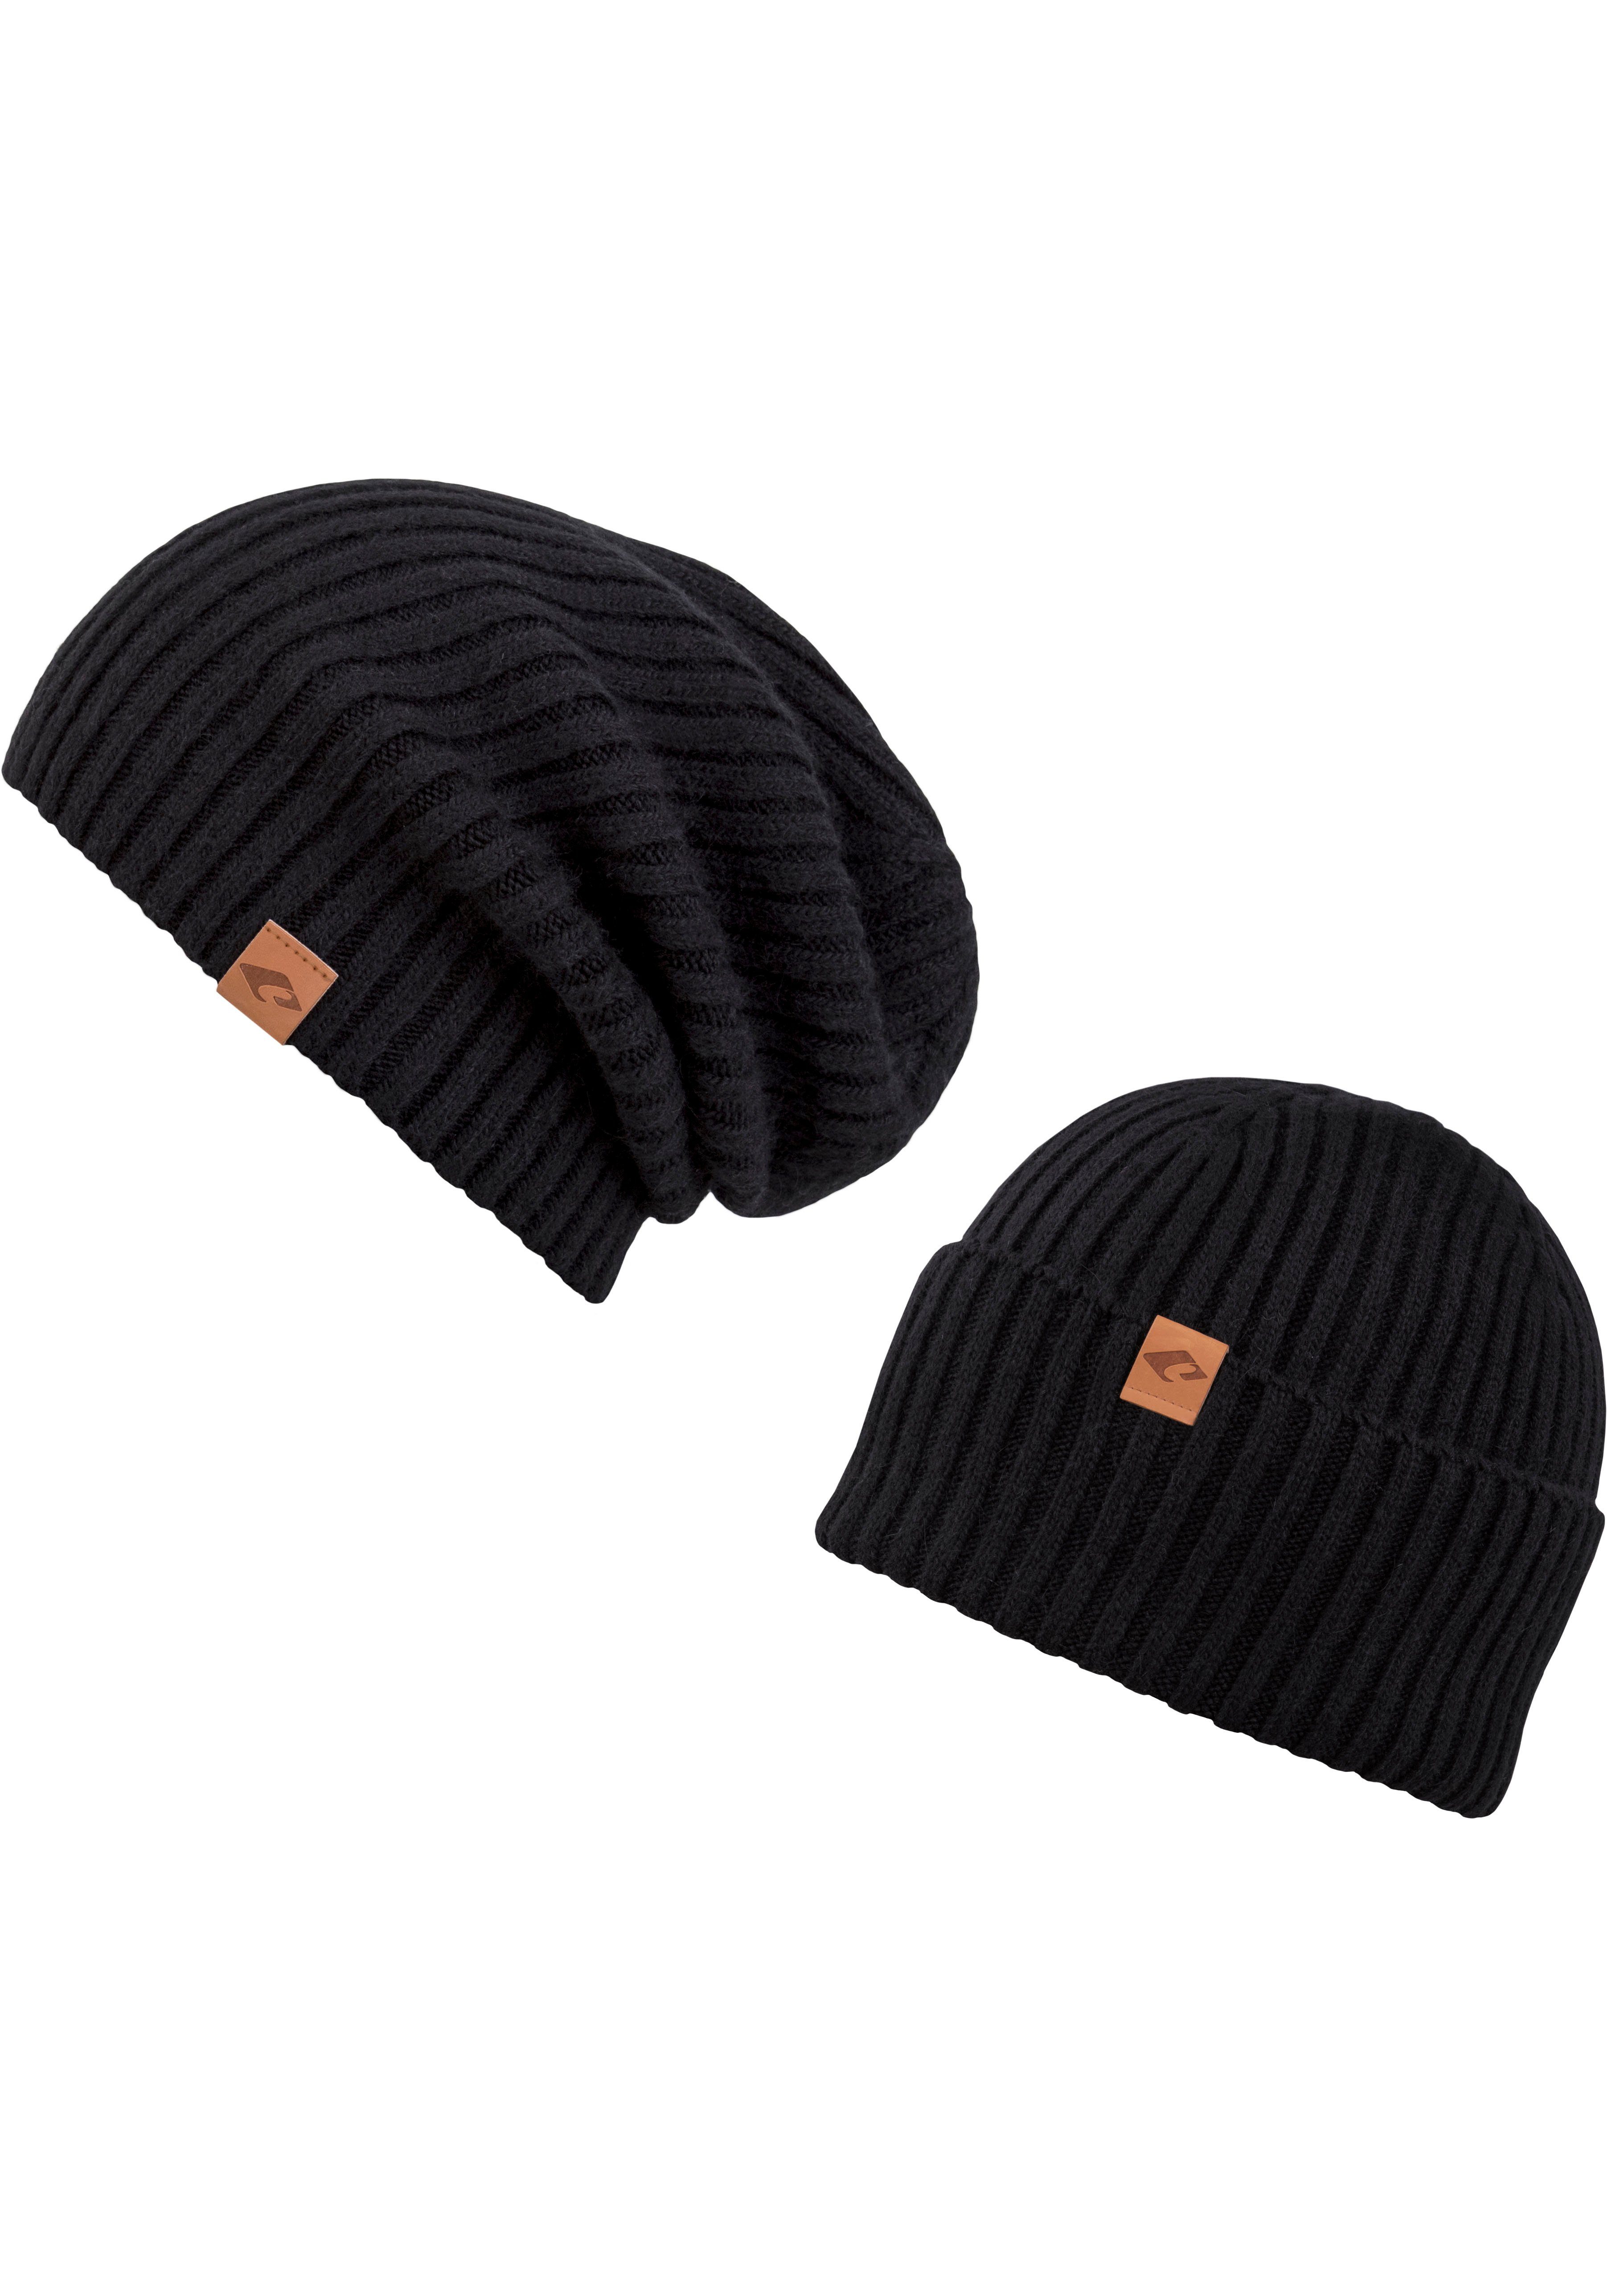 chillouts Justin Beanie Hat black